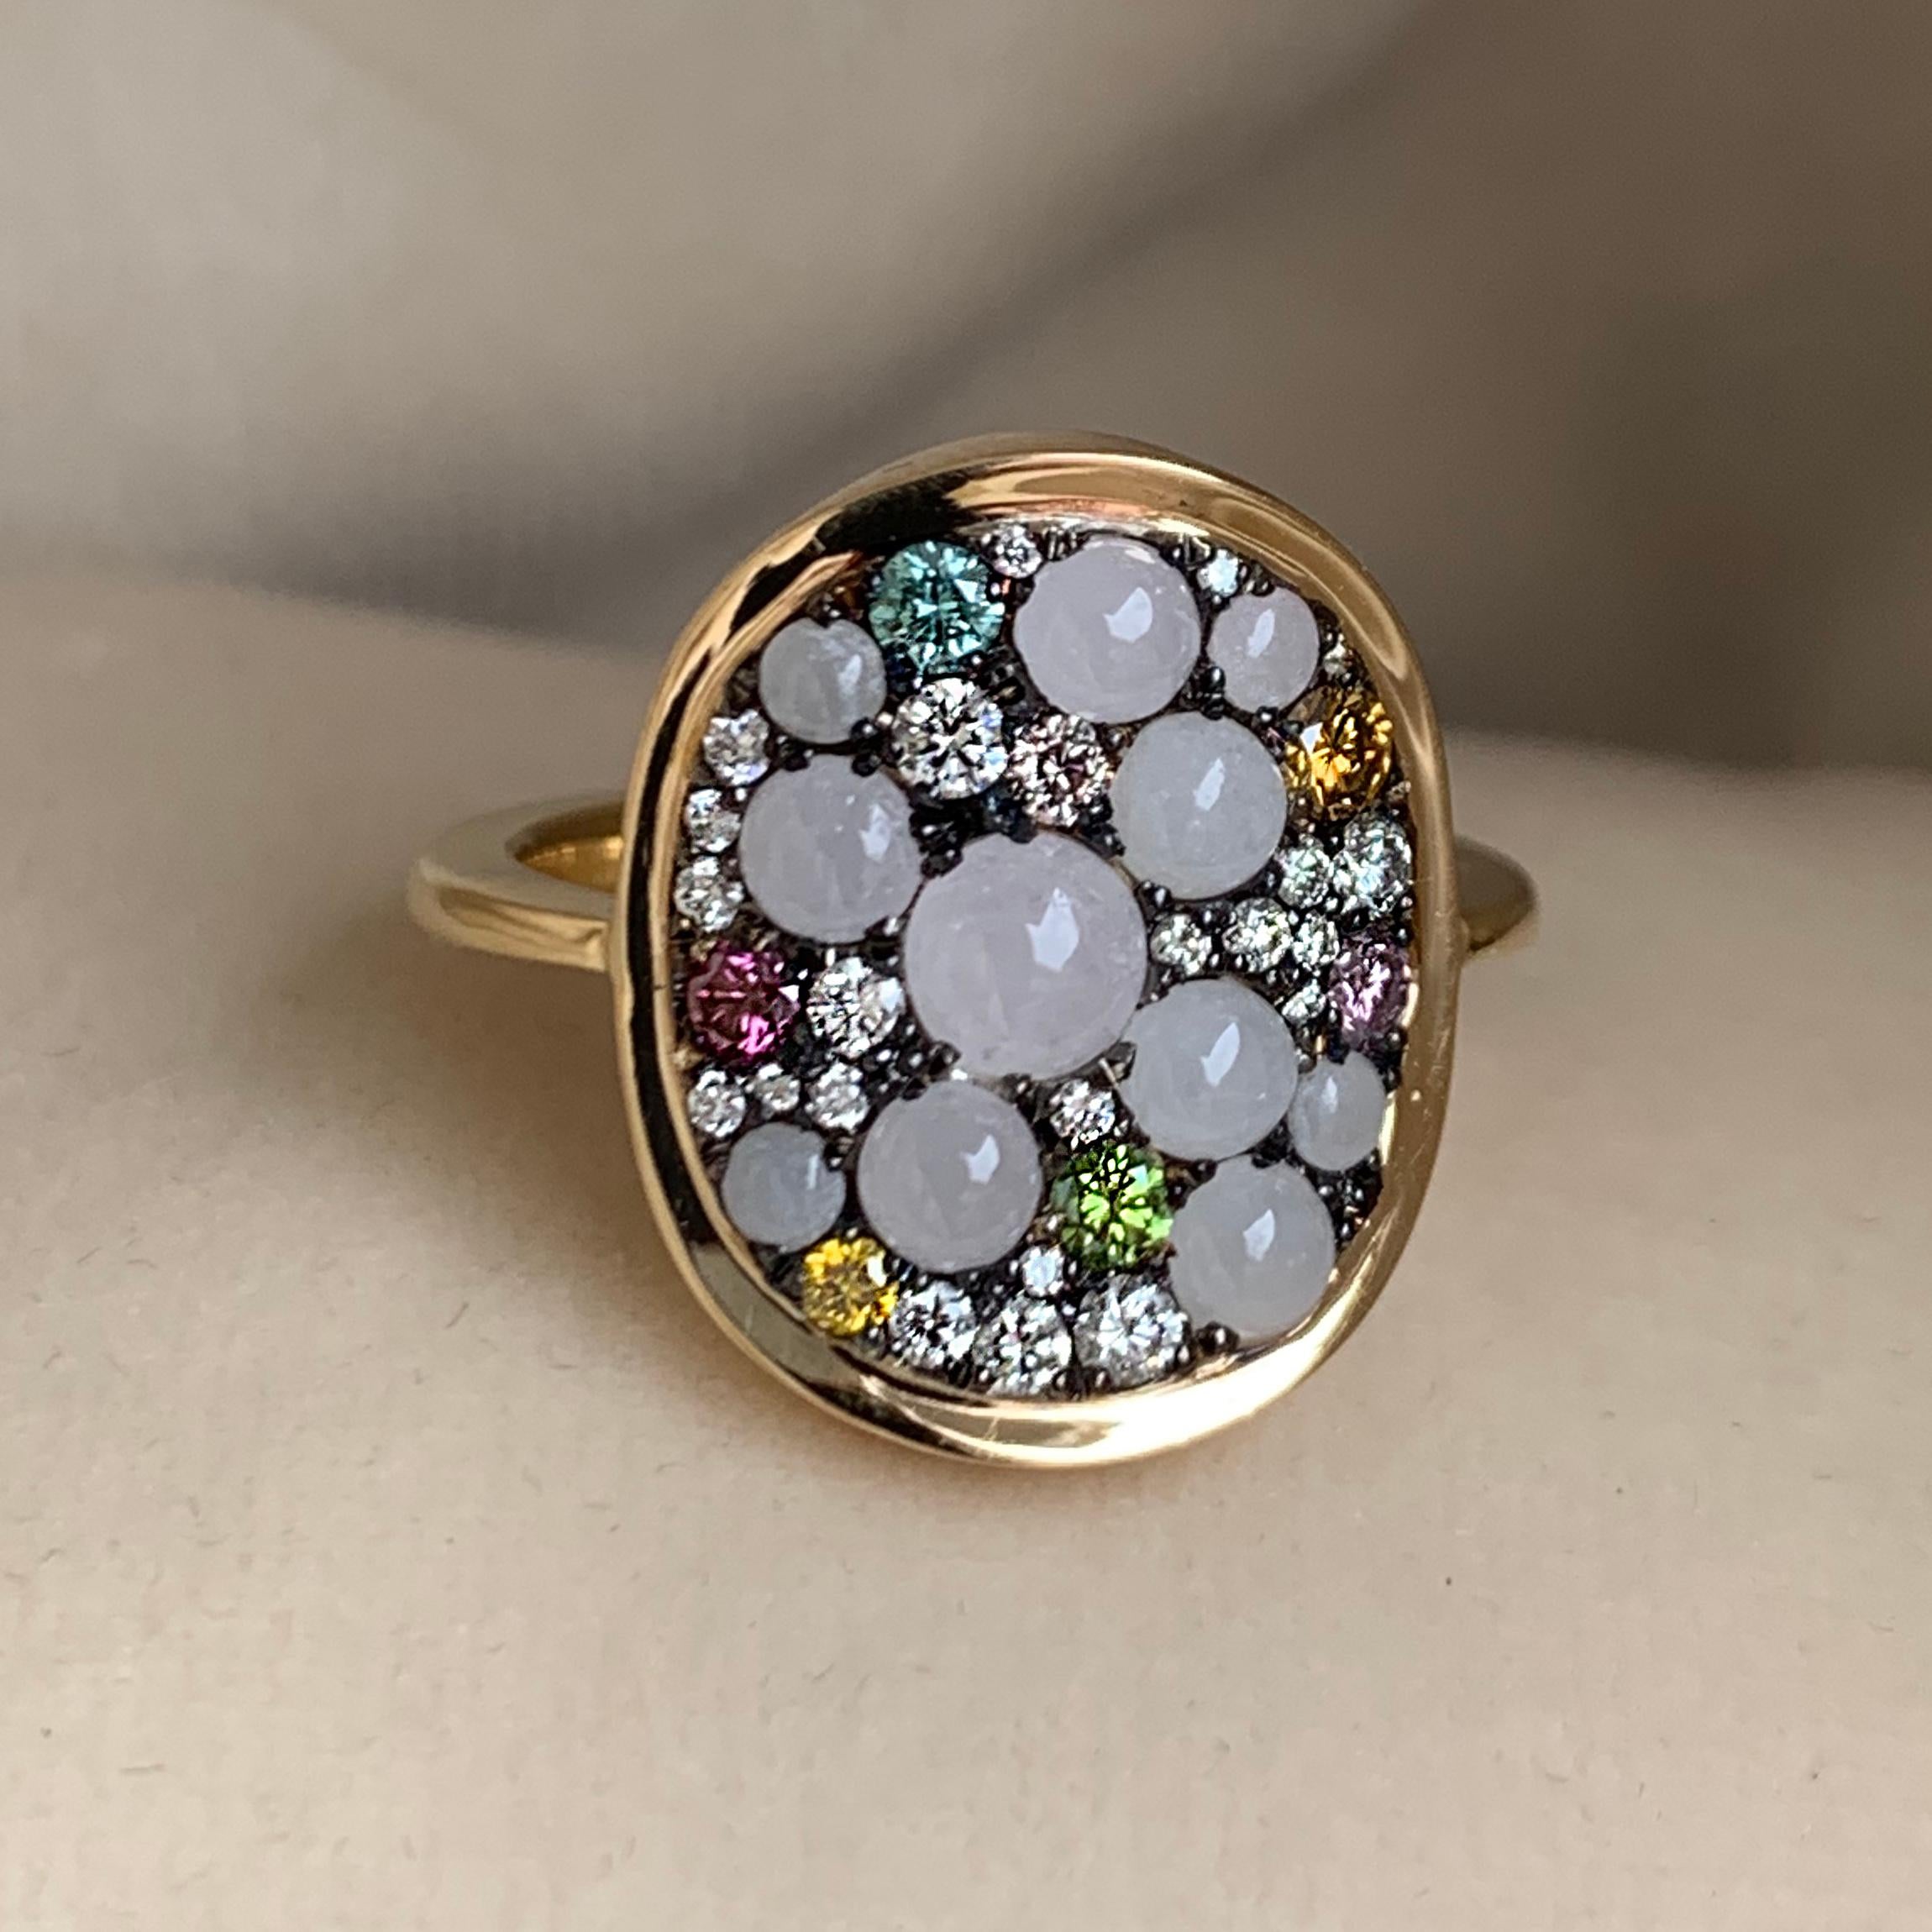 One of a kind ring with the fire and sparkle of diamonds and the lovely soft touch of white Burmese Jadeite:

Made in 18K yellow gold 5,5 g & blackened sterling silver 1,7 g (The stones are set on blackened silver to create a black background for